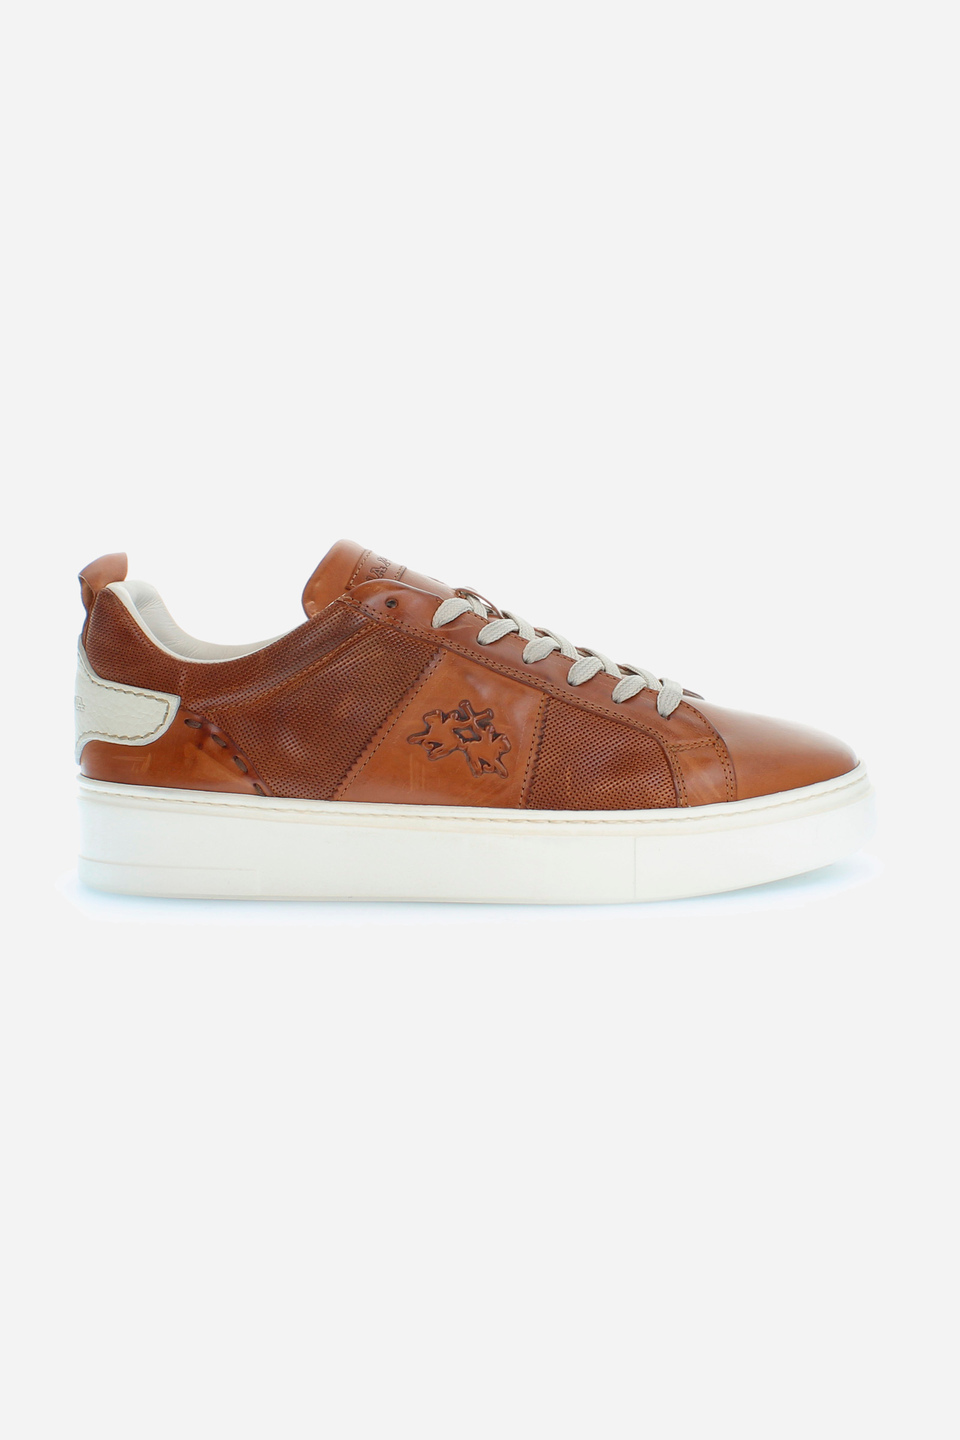 Men's leather trainers with contrasting inserts | La Martina - Official Online Shop